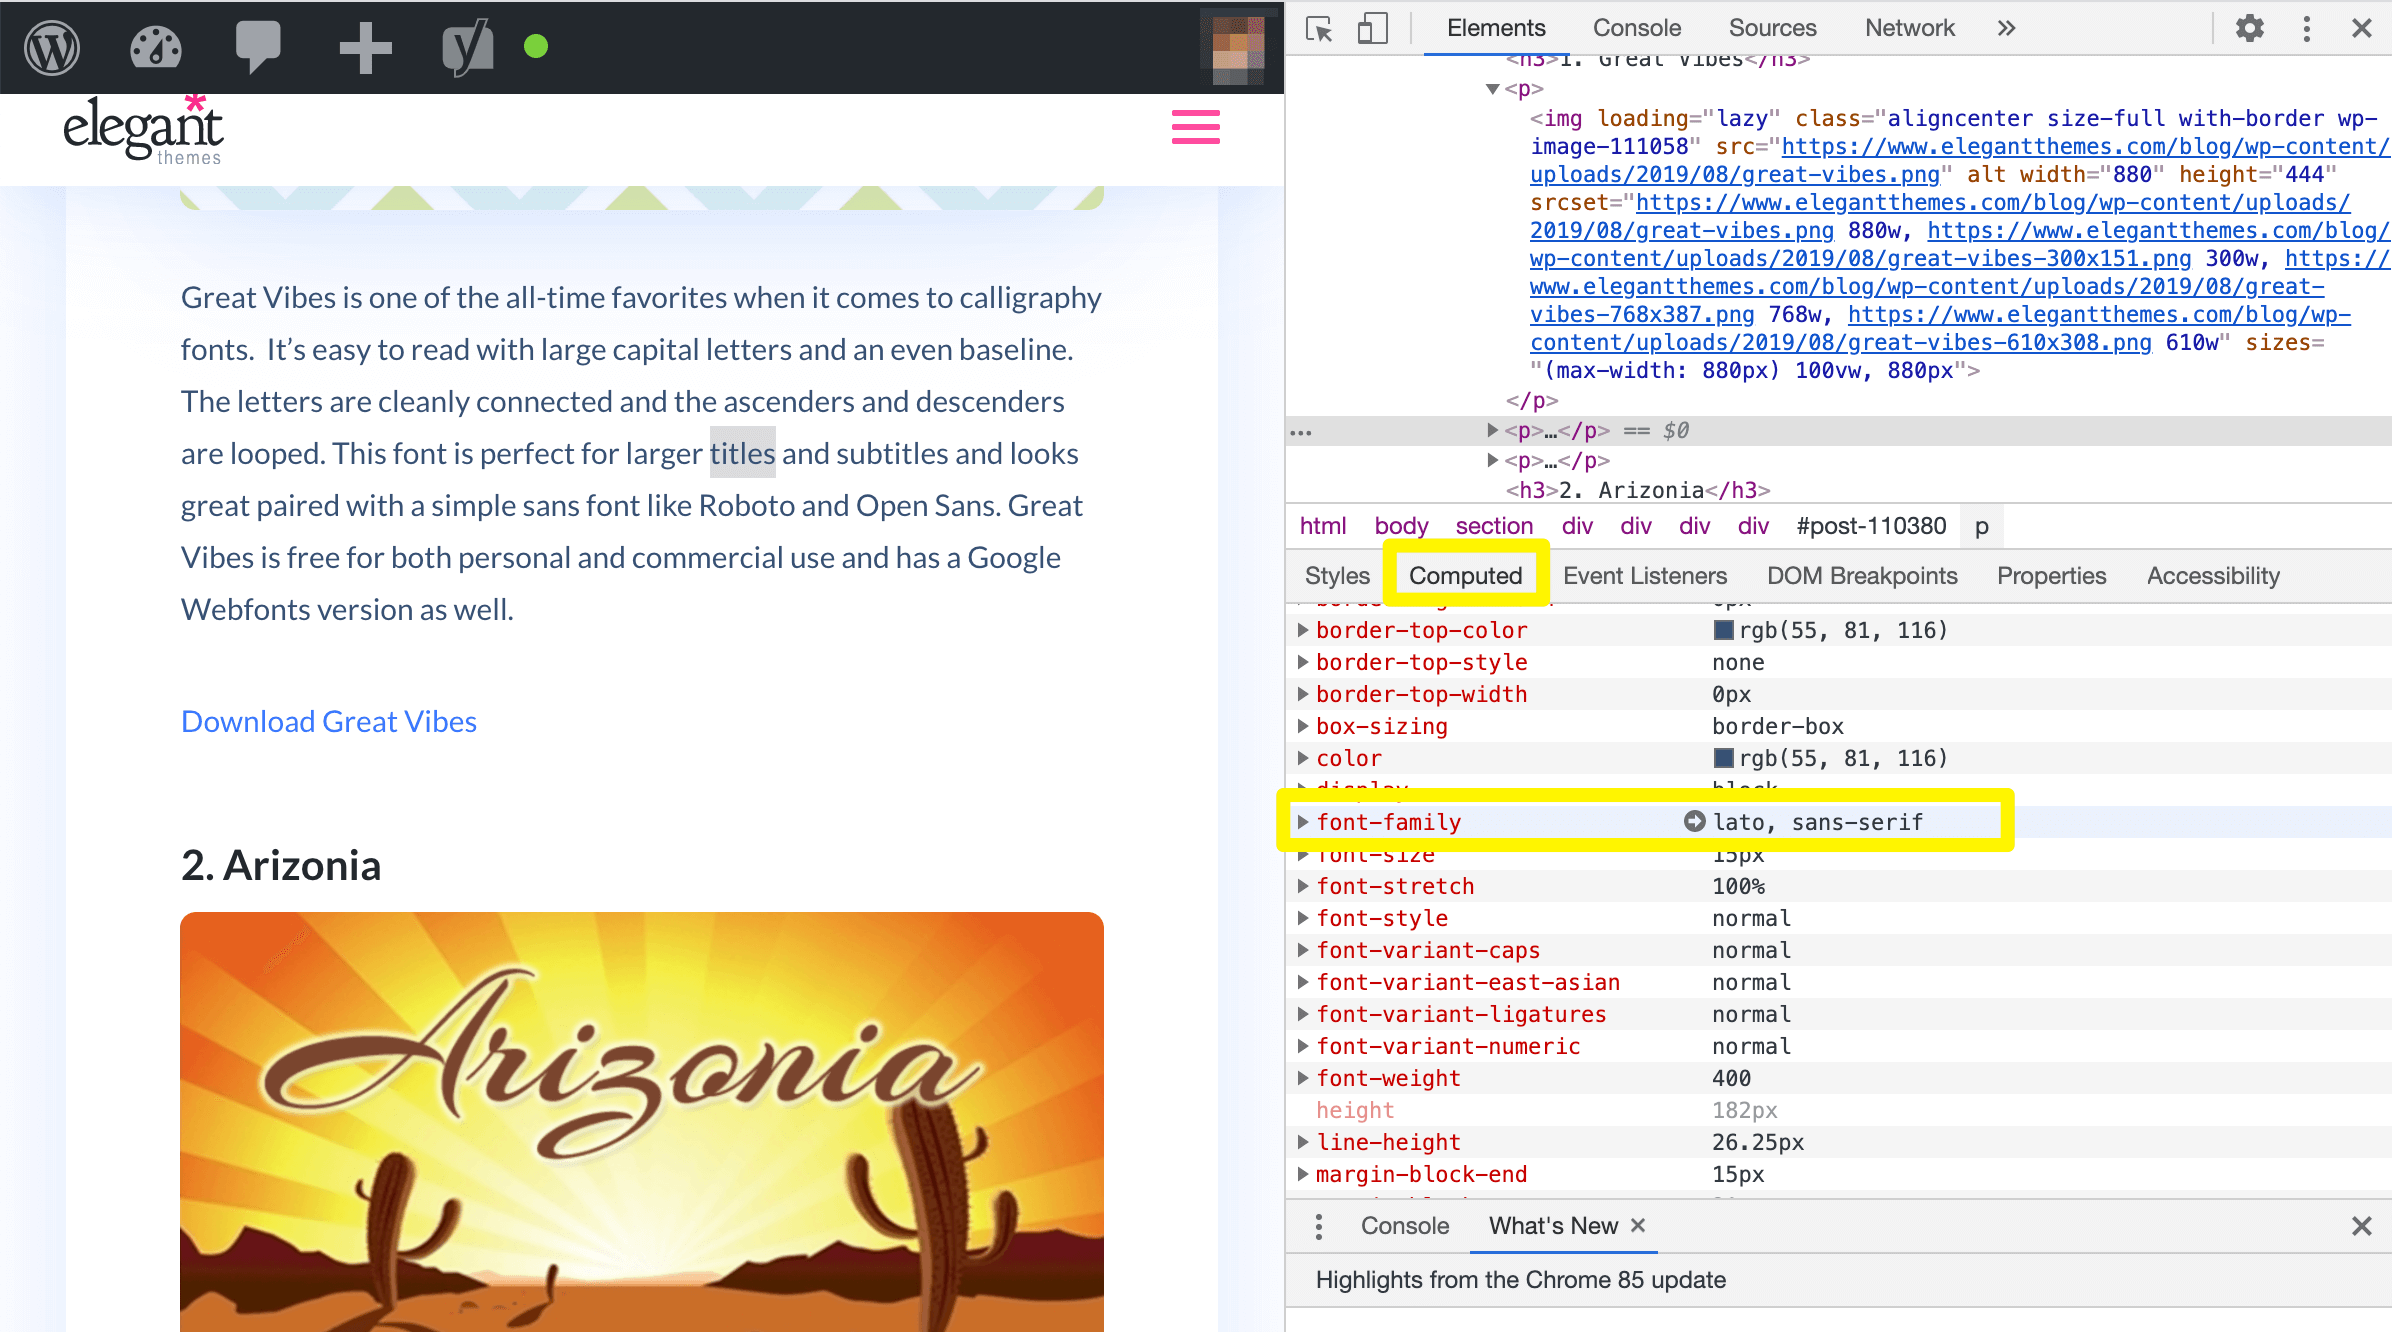 Viewing the font family in the Chrome Inspector tool.